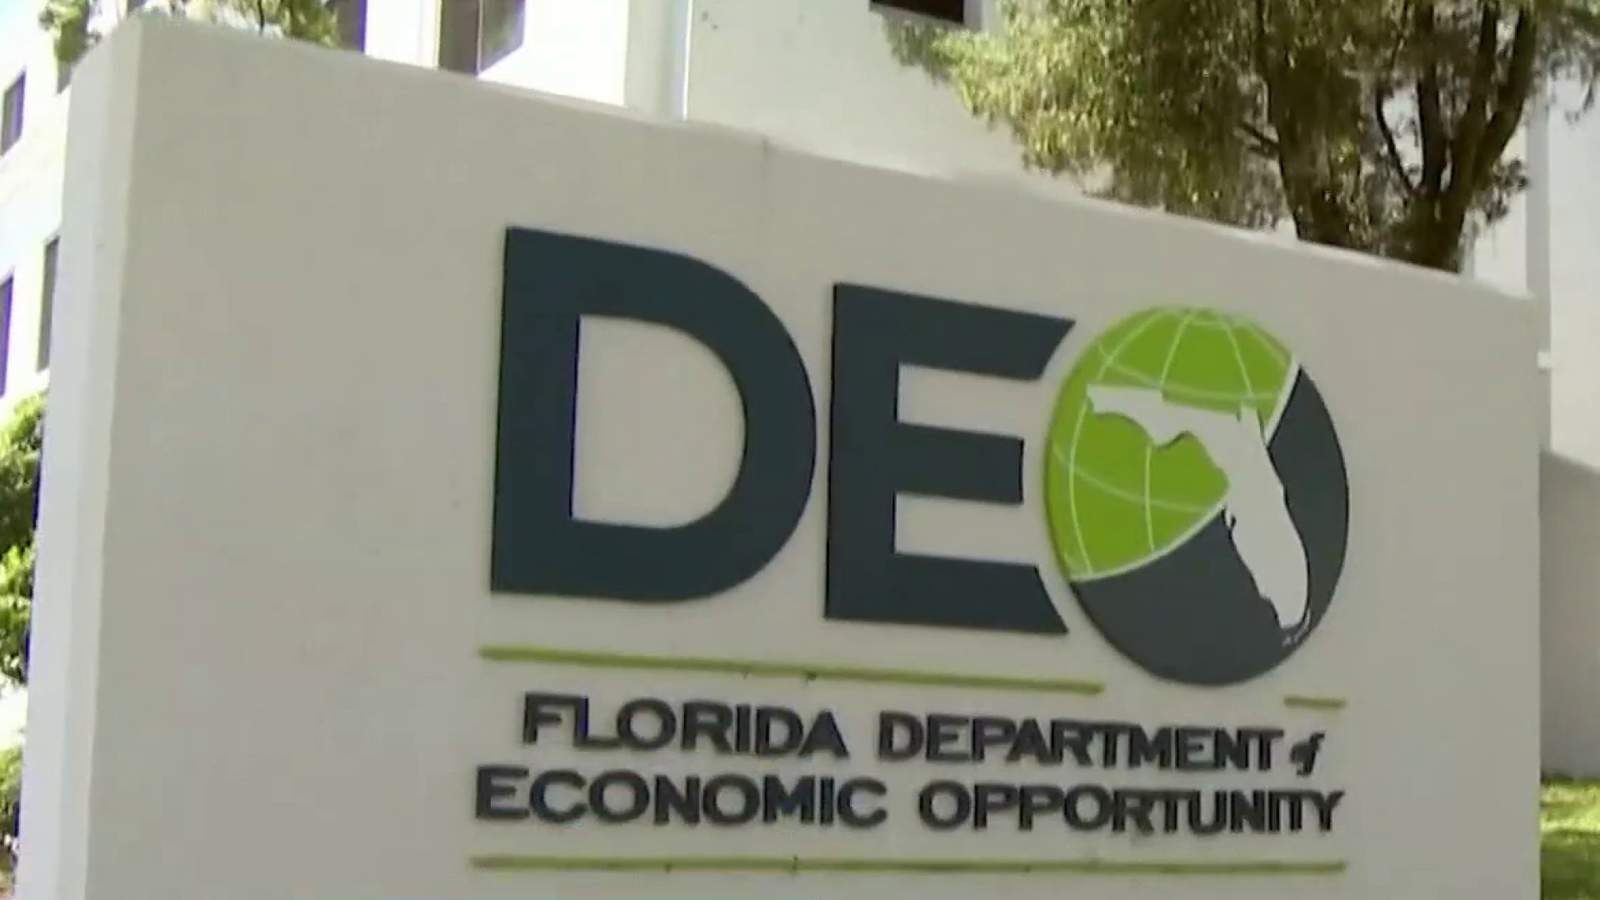 Many of Floridas unemployed are still waiting for help